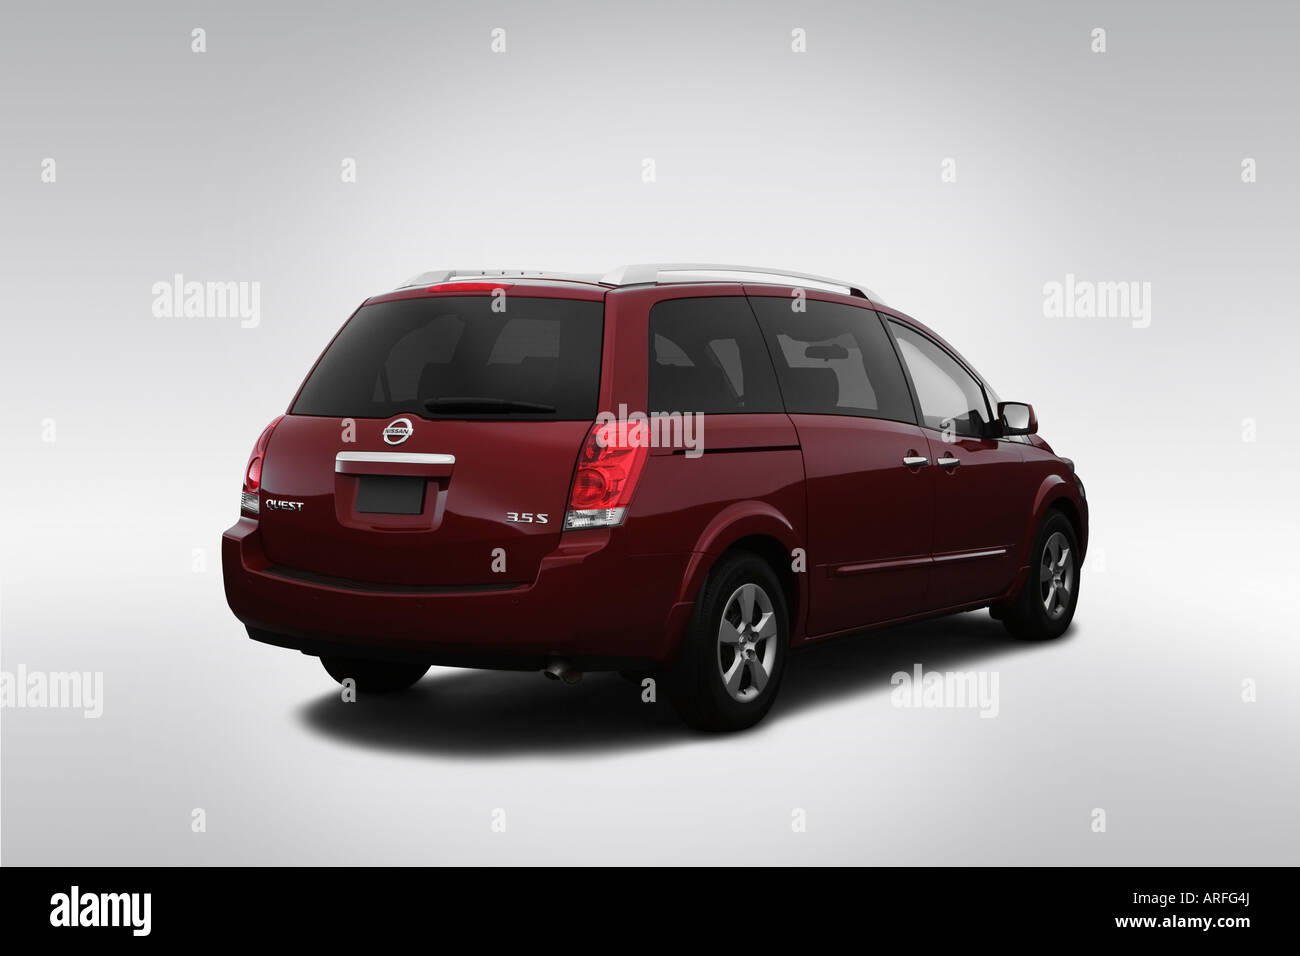 2008 Nissan Quest 3.5 SE in Blue - Engine Stock Photo - Alamy